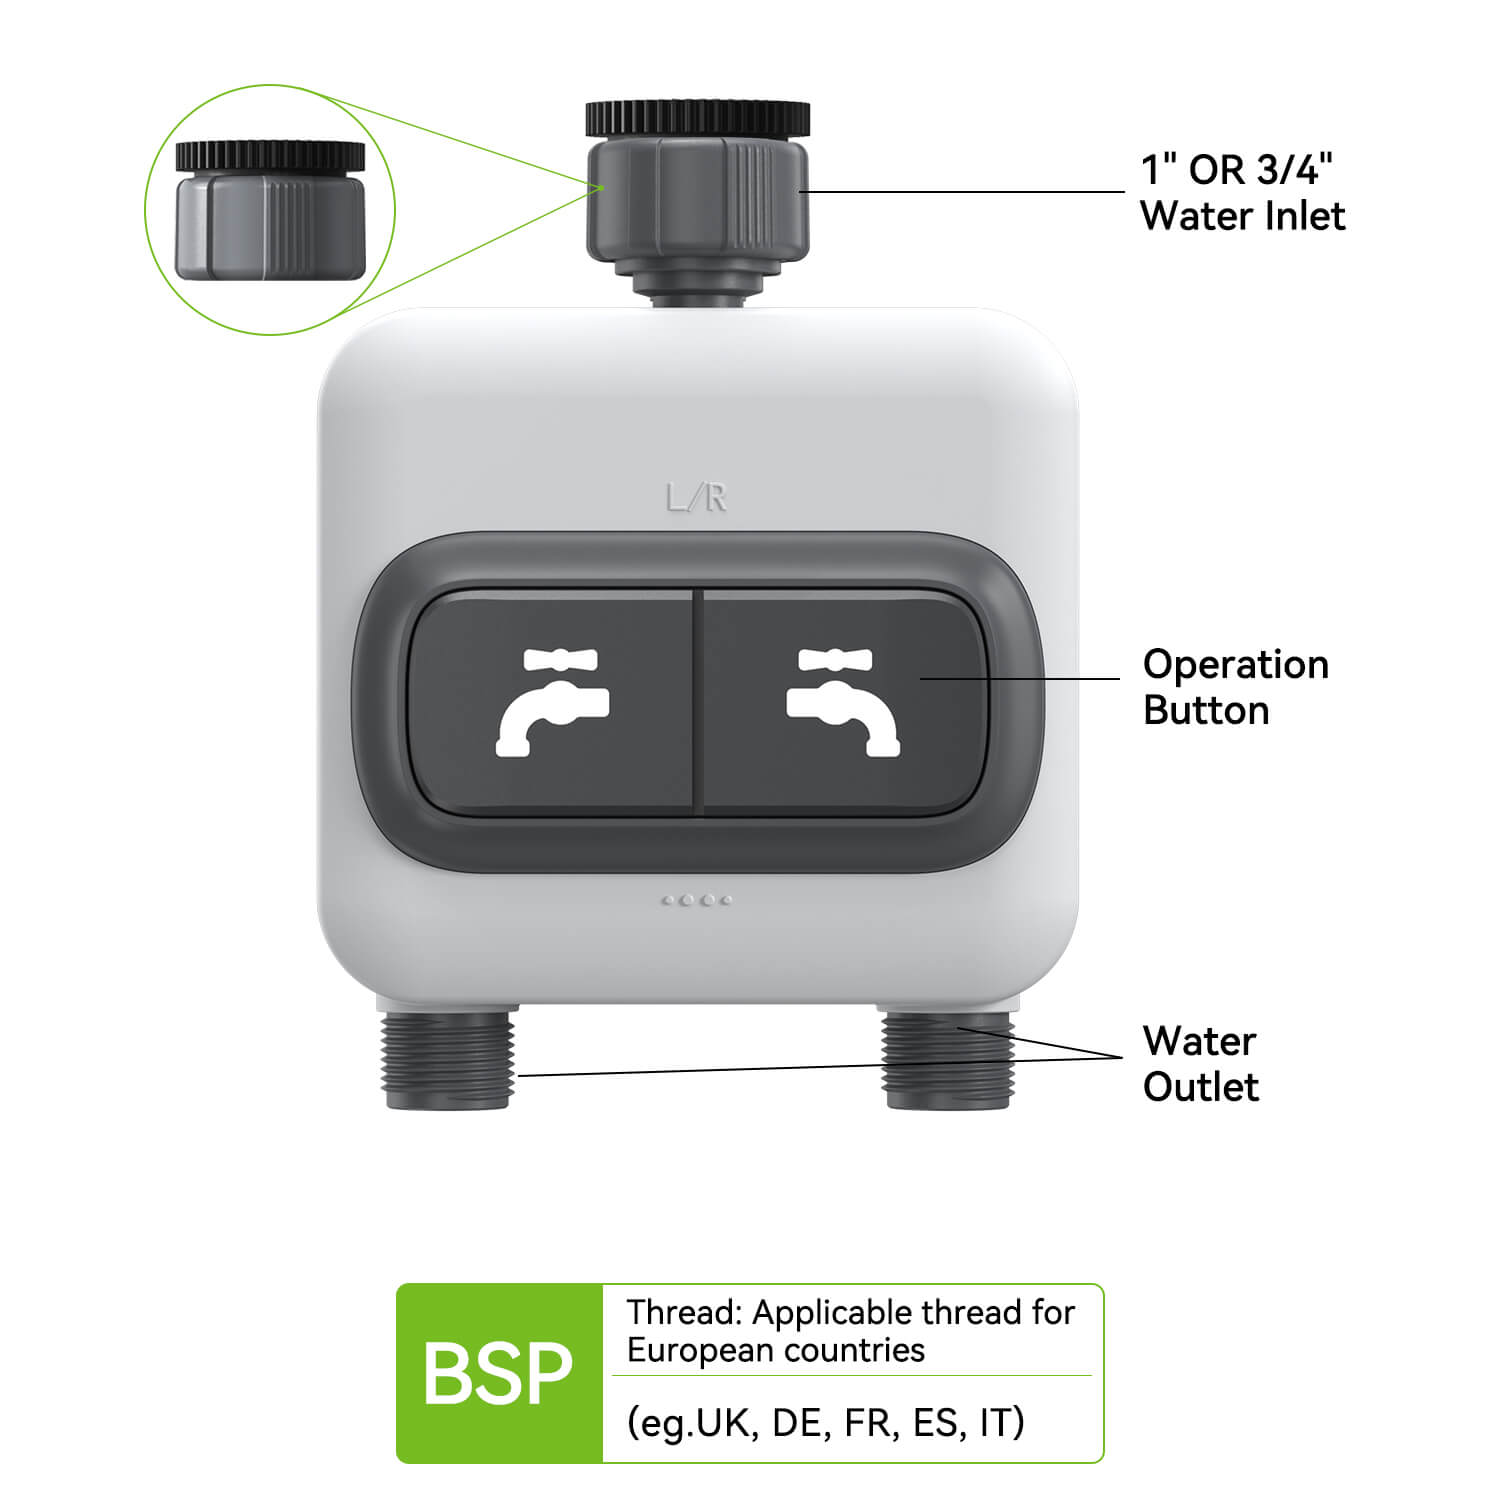 RainPoint Smart+ Garden Watering System Two-Zone Basic Package